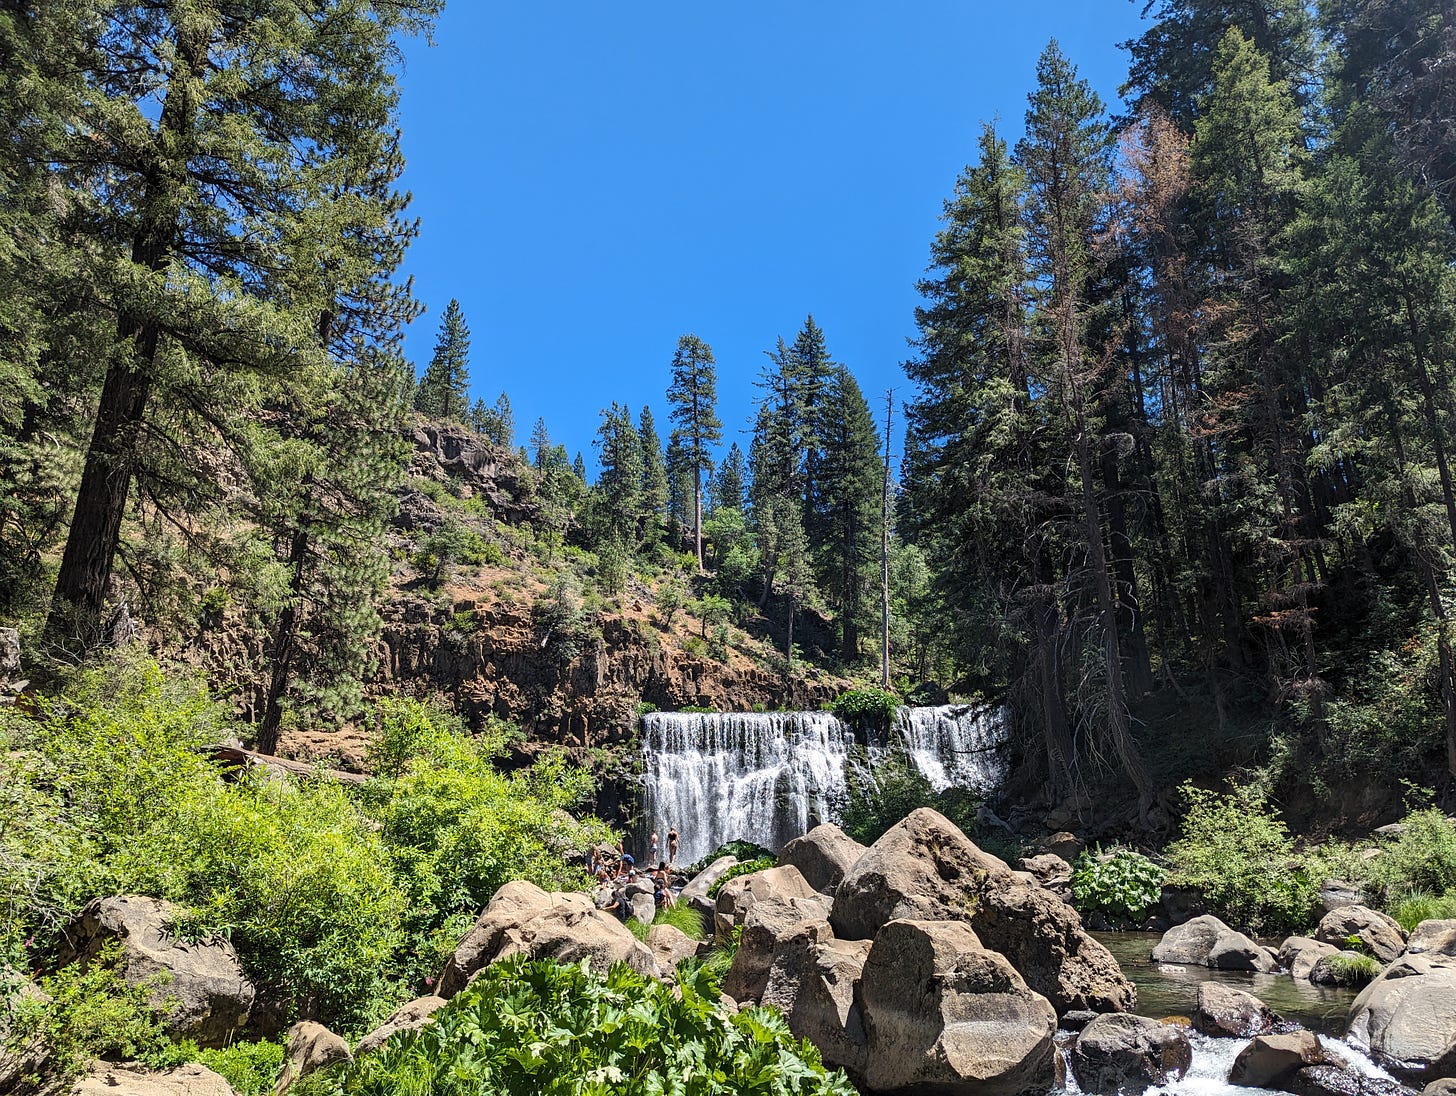 Amid a forest of green pine is a boulder-strewn river that wends its way from a cascading waterfall in the near distance. People play and bathe in the cold pools that have formed in the river, enjoying the chill water in the hot, blue-skied day. 